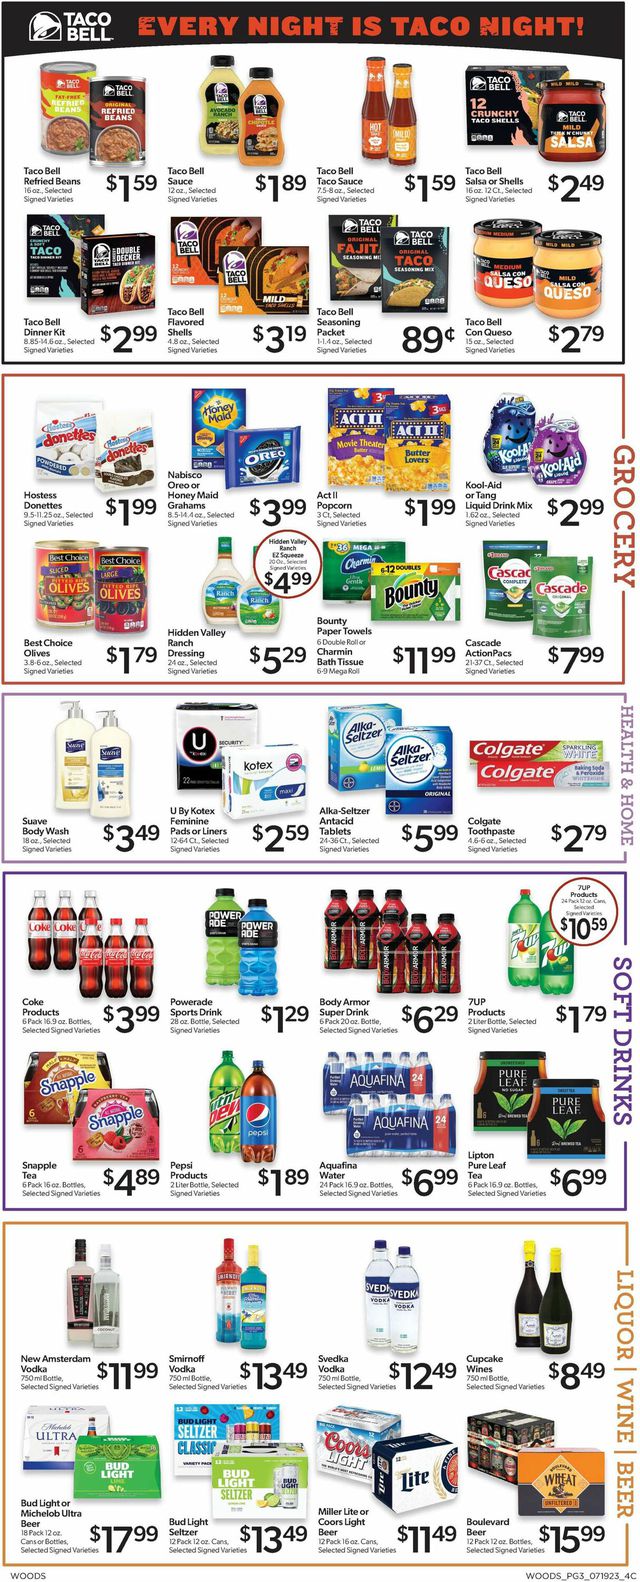 Woods Supermarket Ad from 07/19/2023